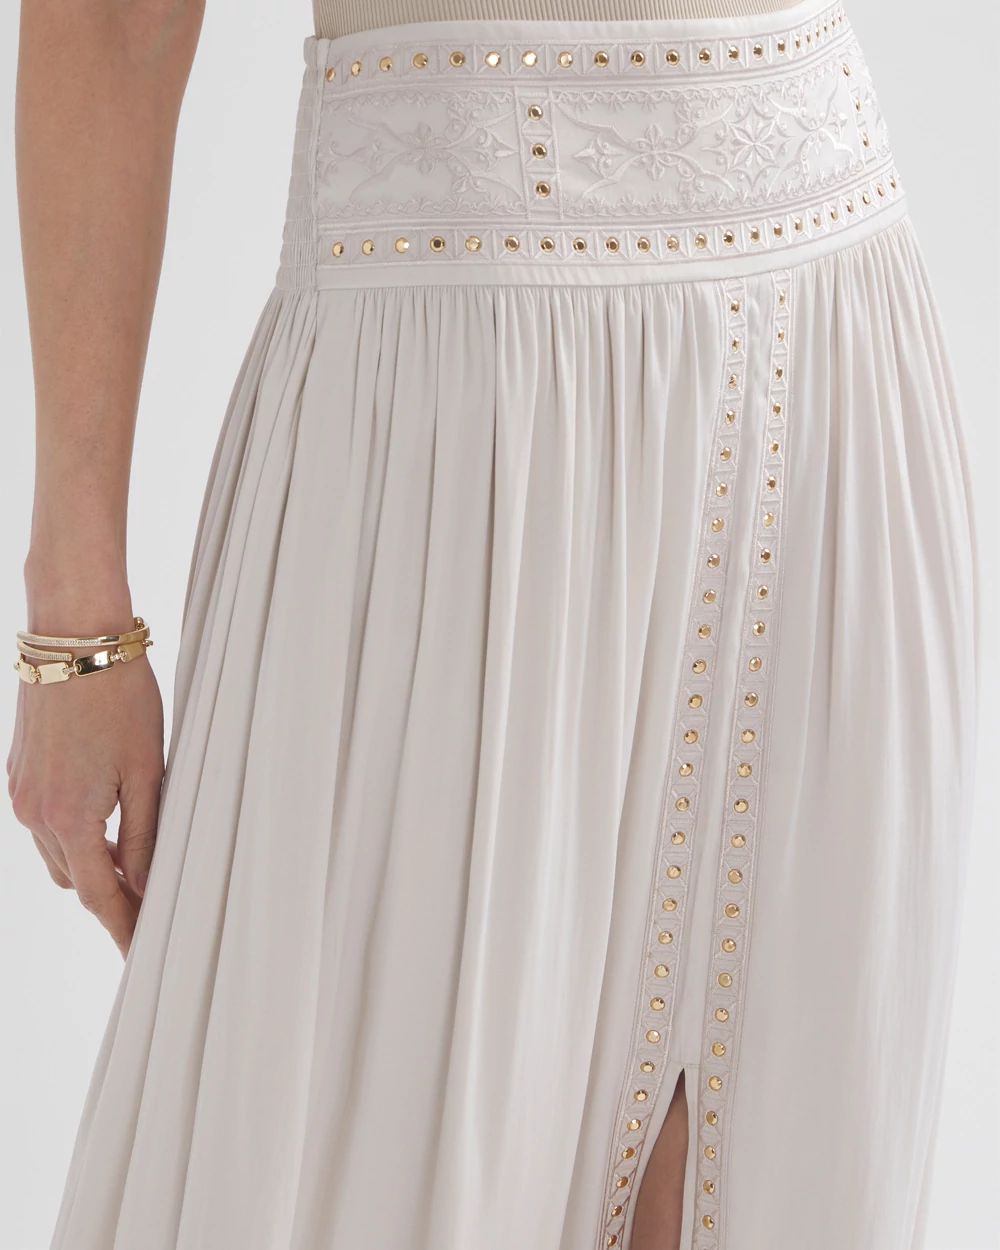 Petite Studded Midi Skirt click to view larger image.